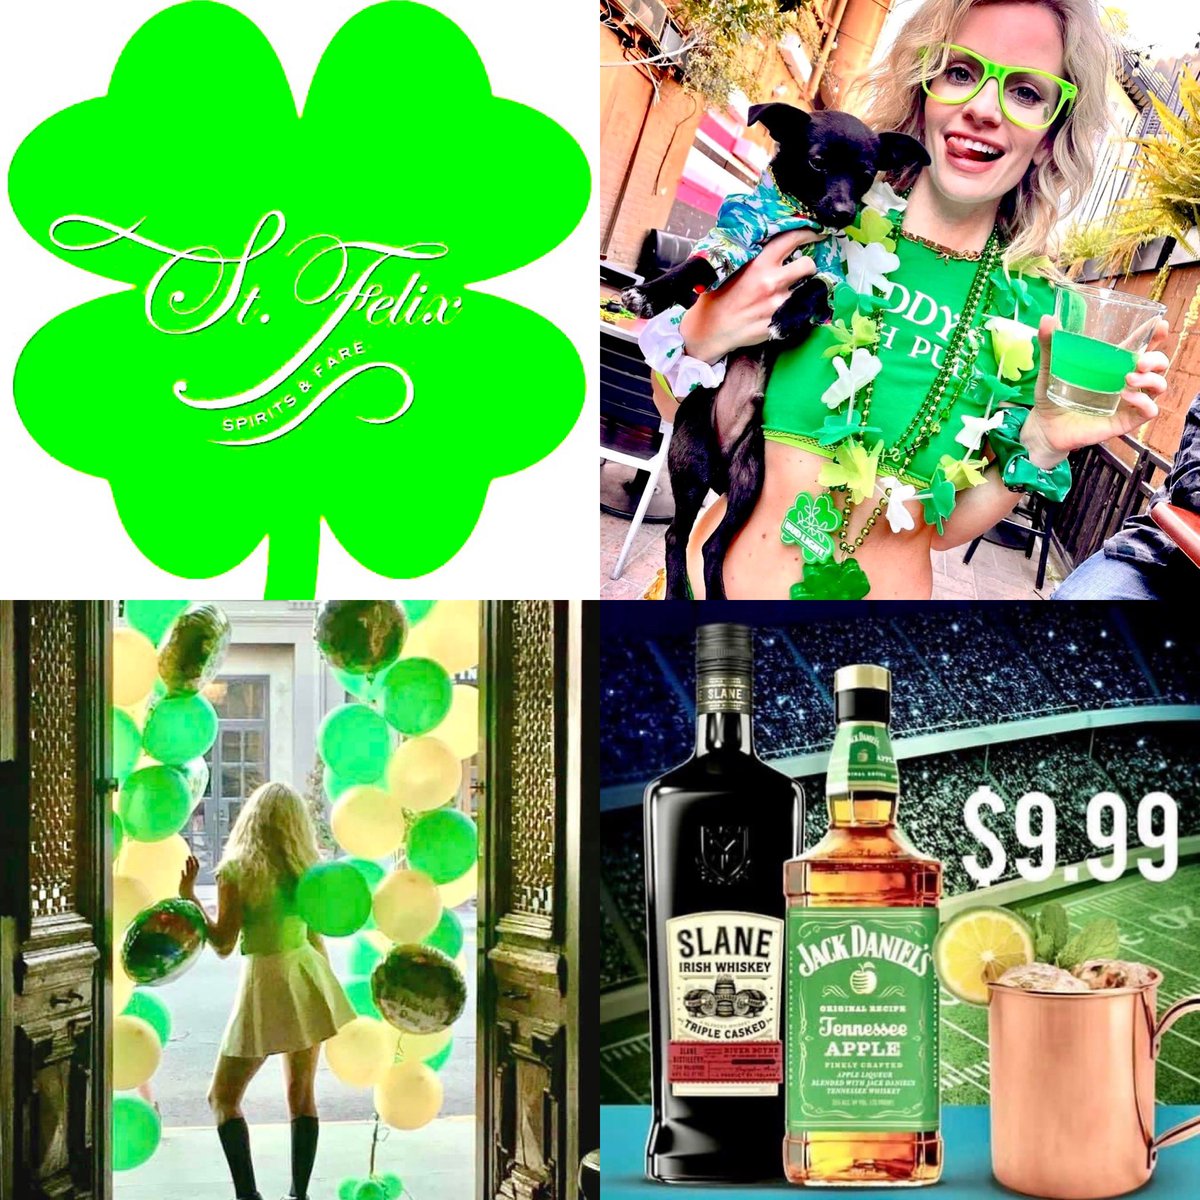 Our 12th Annual St Patrick’s Day Bash at St Felix starts at 4pm This Friday!   DJ Space Jam!  $5 Irish Luck Shots!  @millerlite Beer & @highnoonsunsips Bucket Specials!  @slanewhiskey will be flowing!  💚🍀🥂  #stpatricksday #stpatricks #laevent #laevents #hollywoodevents